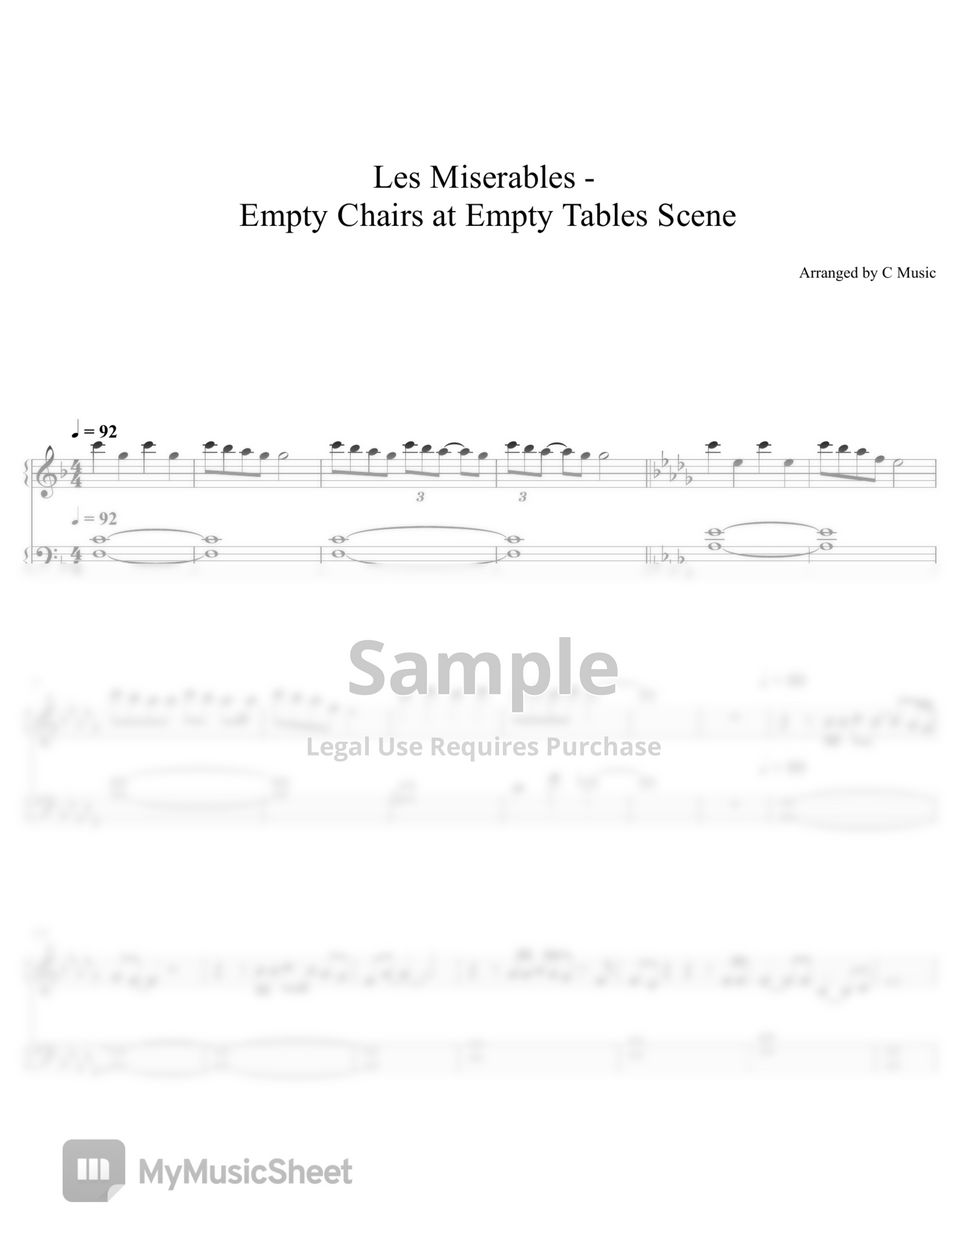 Claude-Michel Schönberg - Empty Chairs at Empty Tables (Les Miserables) by C Music